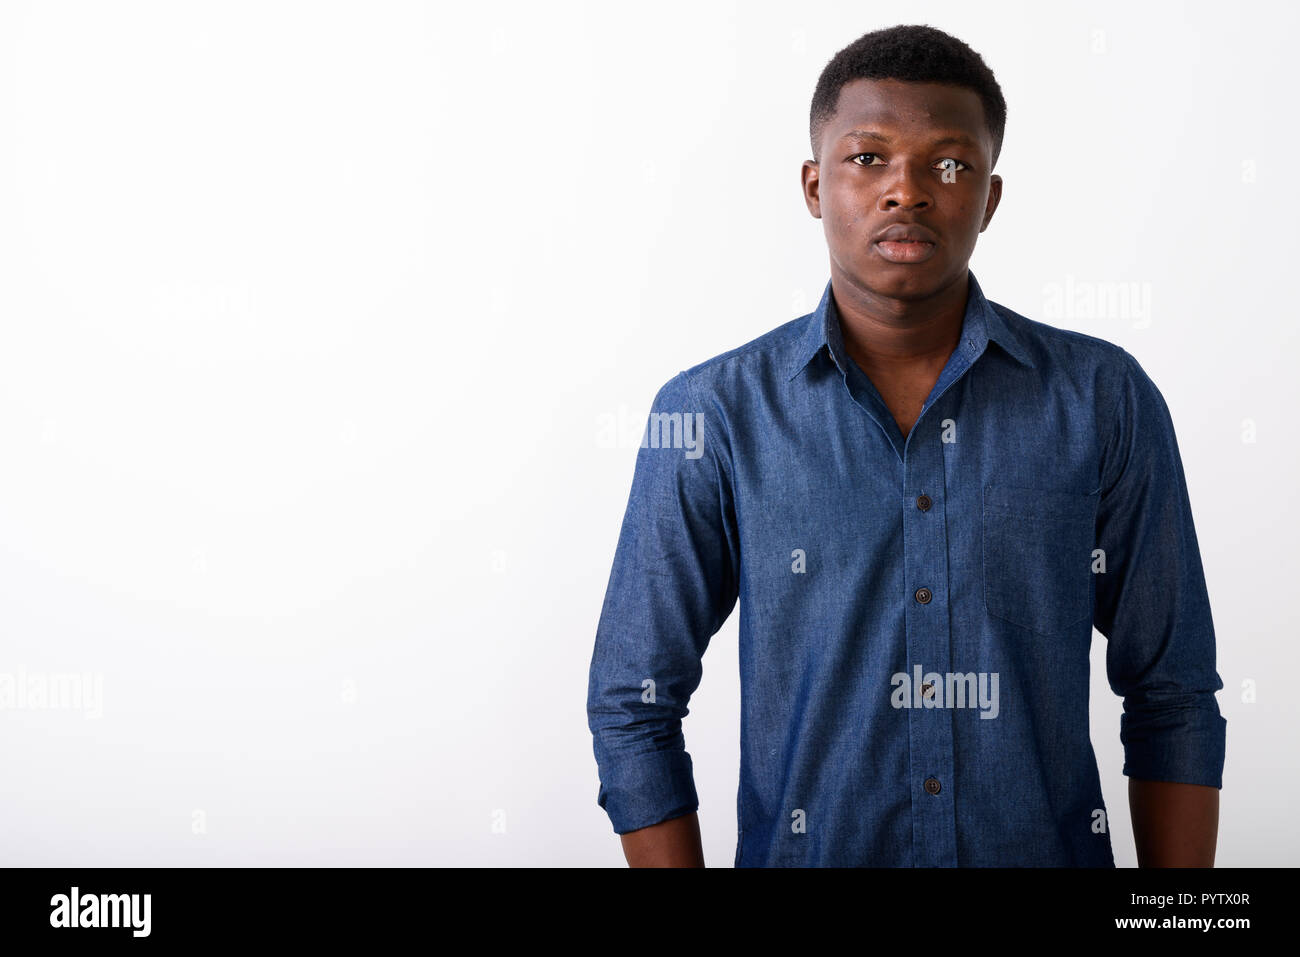 Portrait of young black African man against white background Stock Photo